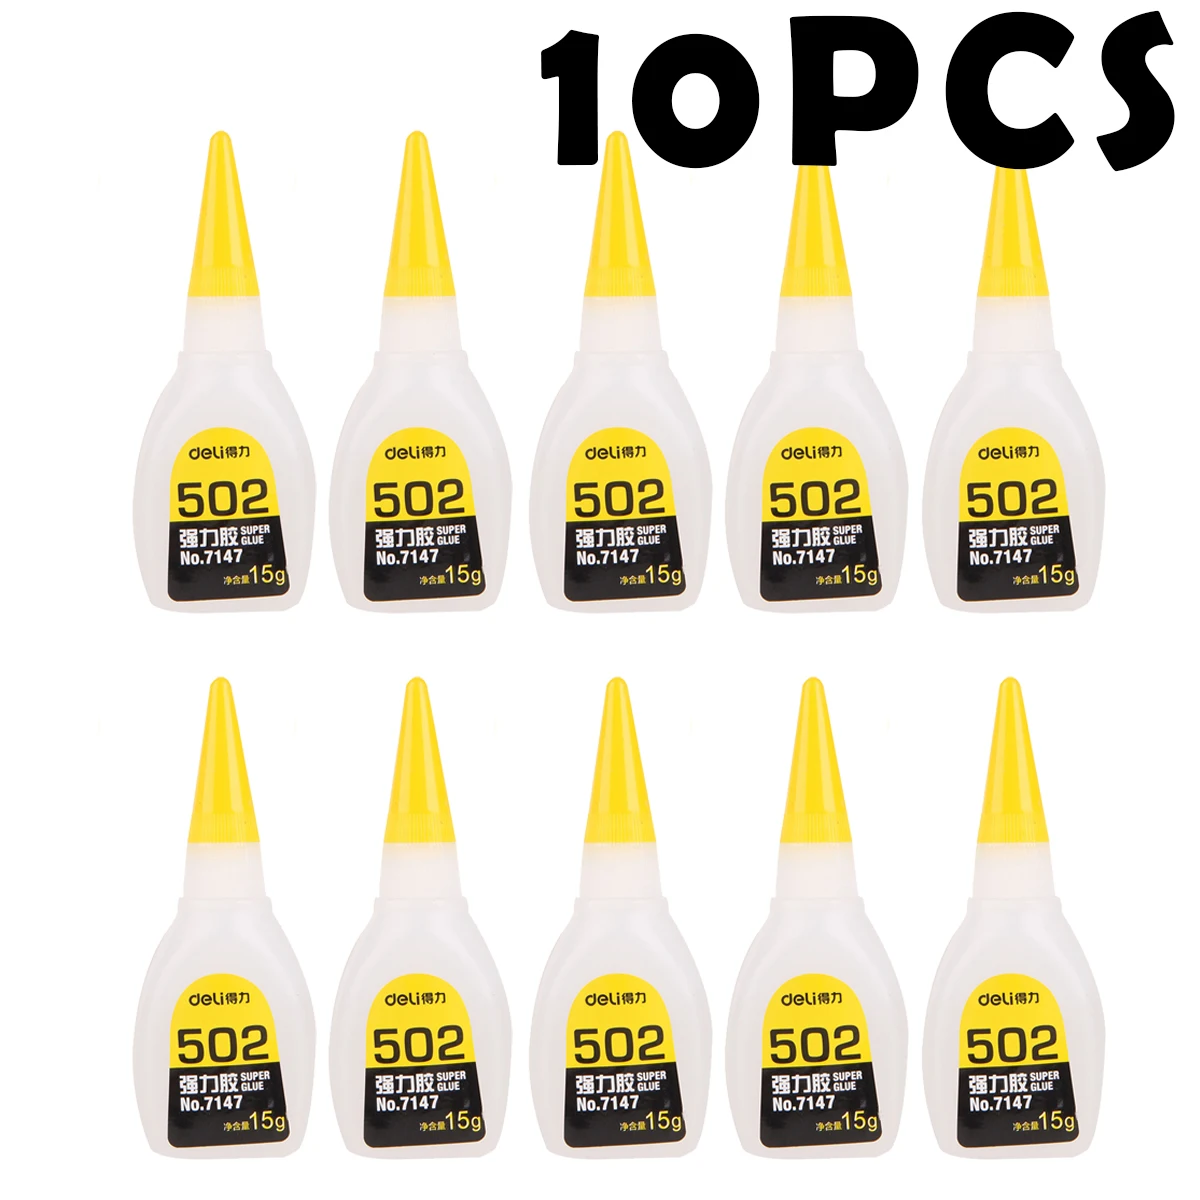 

10pcs Deli 502 Super Glue Instant Quick-drying Cyanoacrylate Adhesive Leather Rubber Wood Metal Strong Bond 15g Liquid Glue Tool